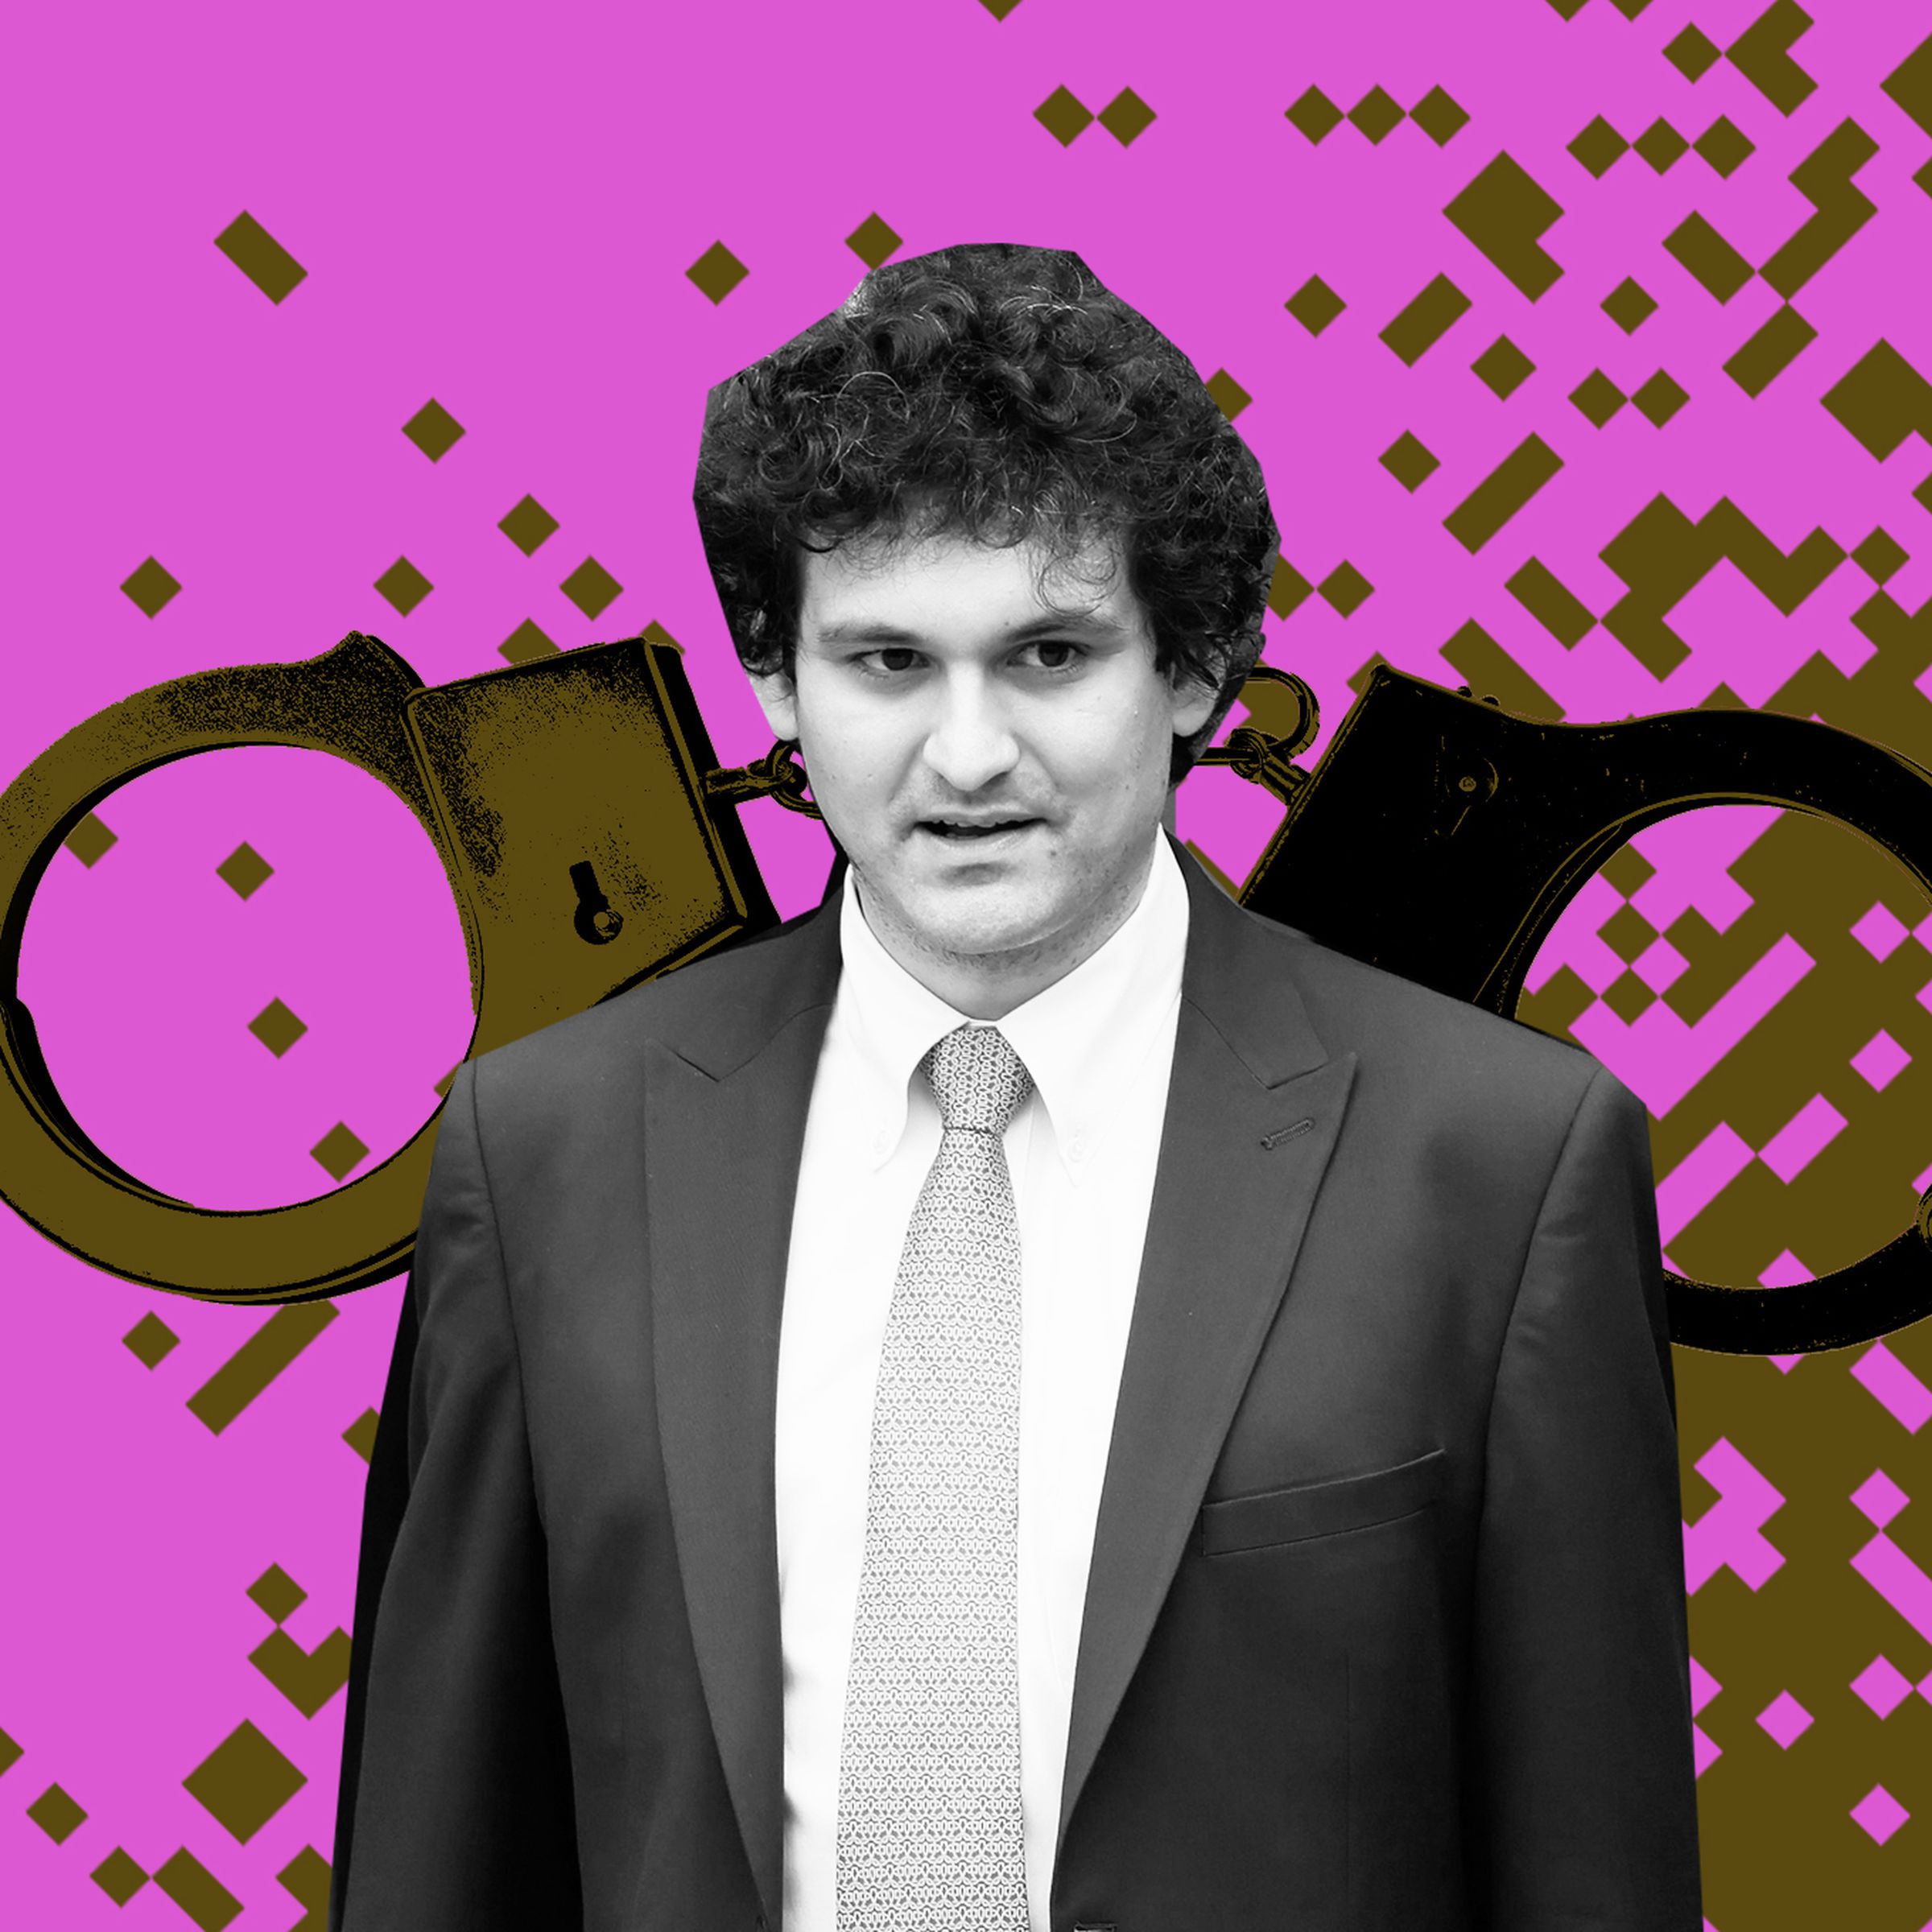 Photo illustration of Sam Bankman Fried on a background of pixels and handcuffs.